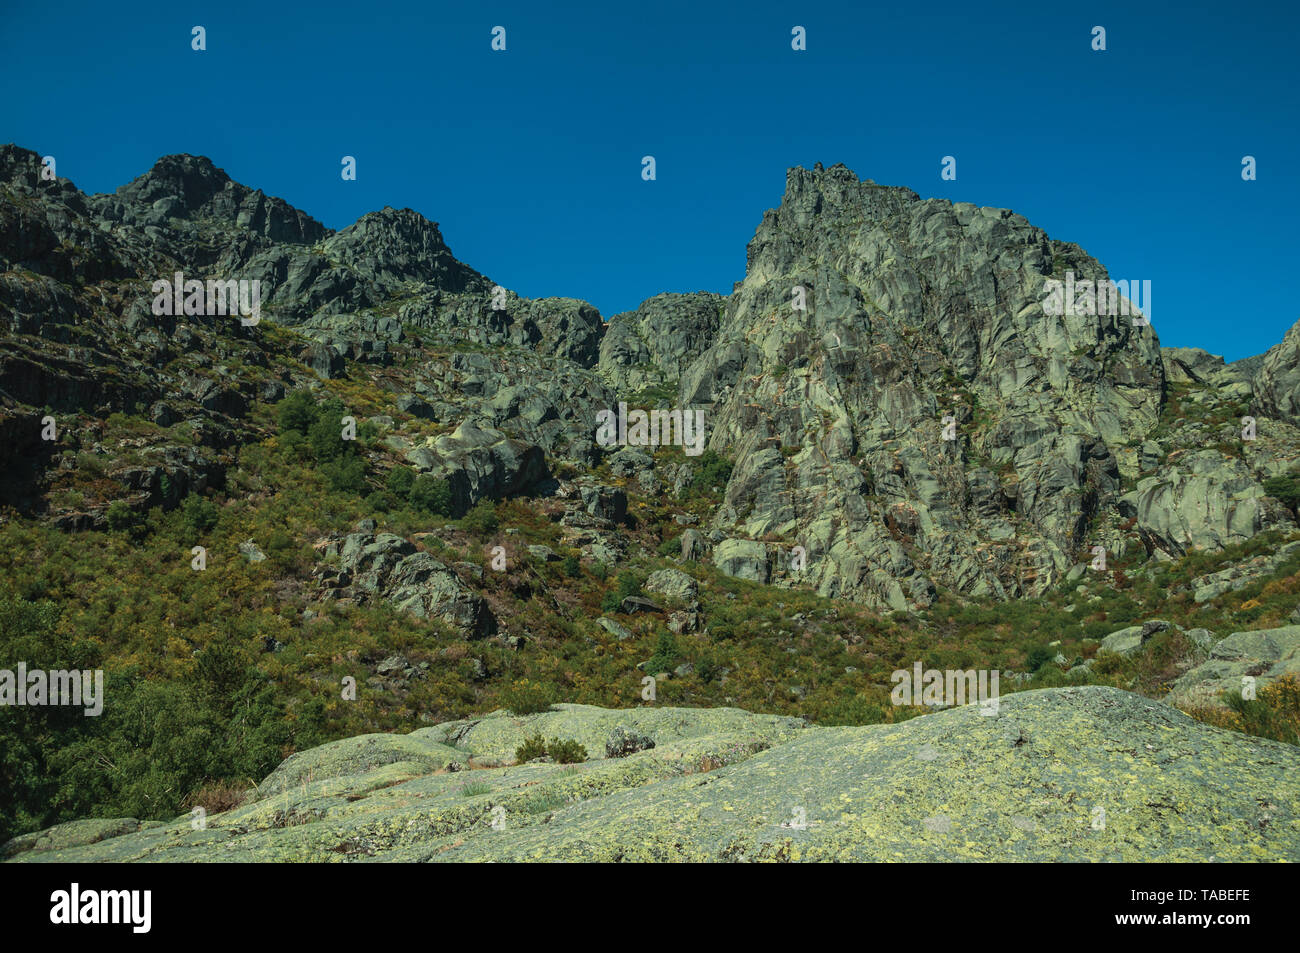 Mountainous landscape with rocky cliffs covered by bushes at the highlands of Serra da Estrela. The highest mountain range in continental Portugal. Stock Photo